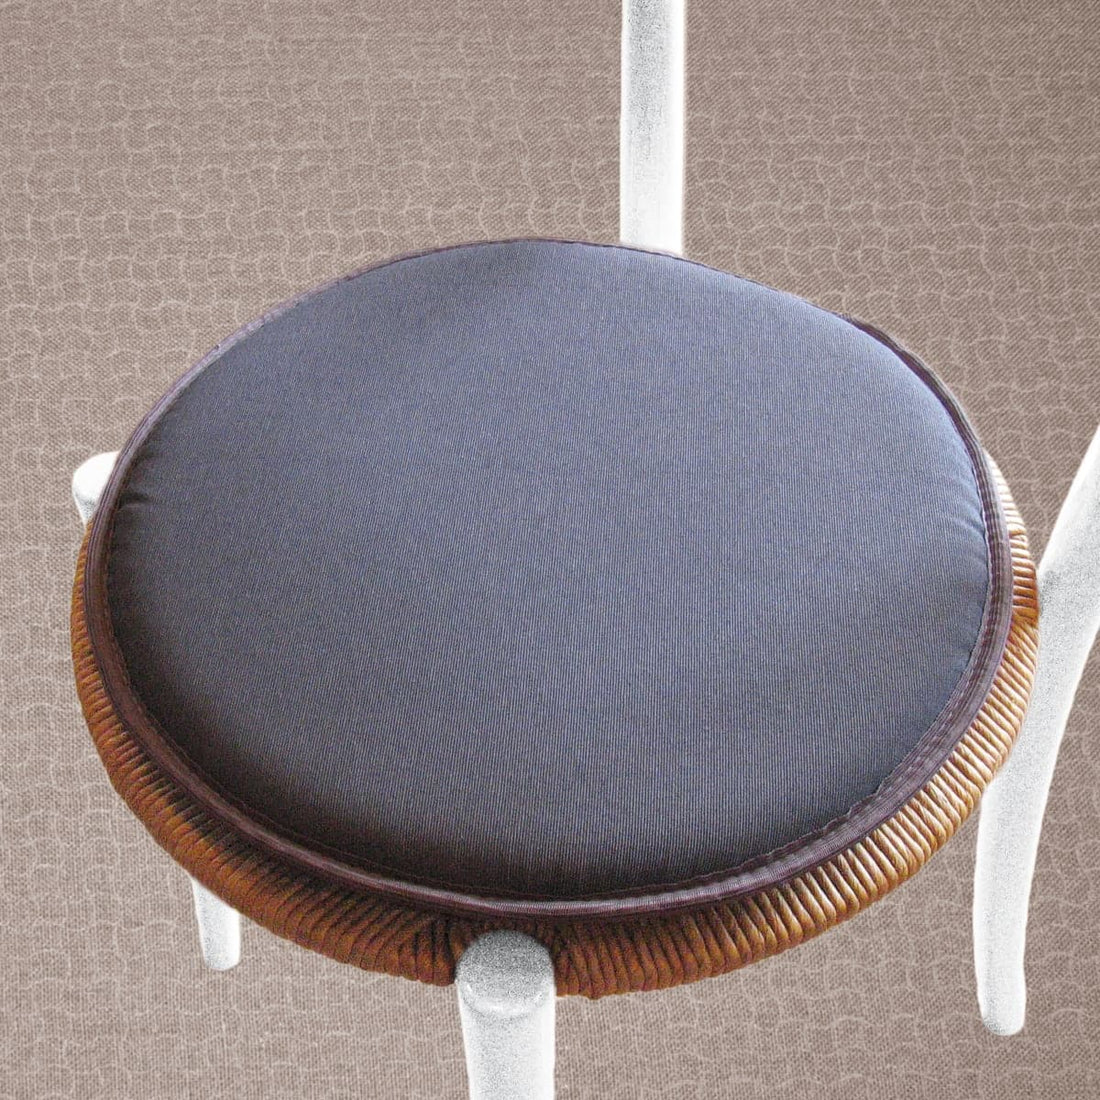 ROUND CHAIR COVER WITH NON-SLIP BACK GREY - best price from Maltashopper.com BR480006592